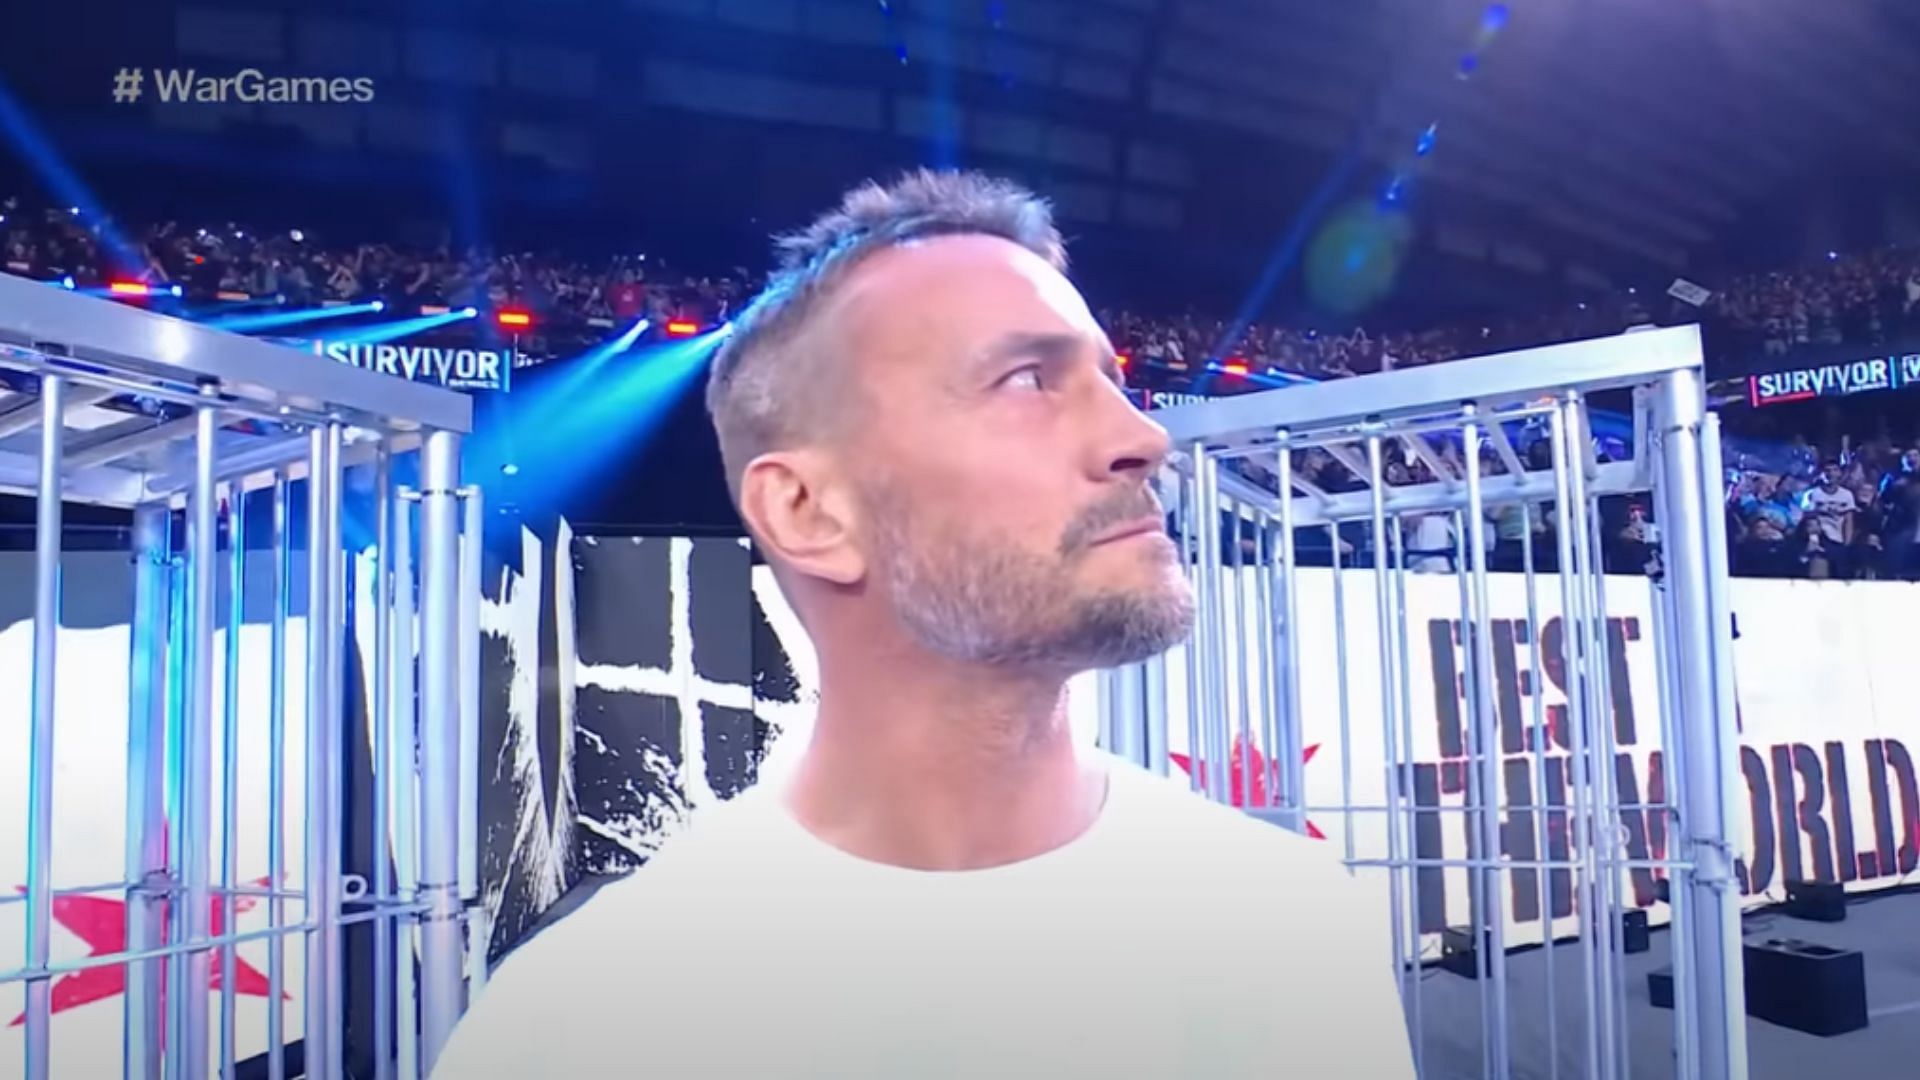 CM Punk recently became a member of the RAW roster